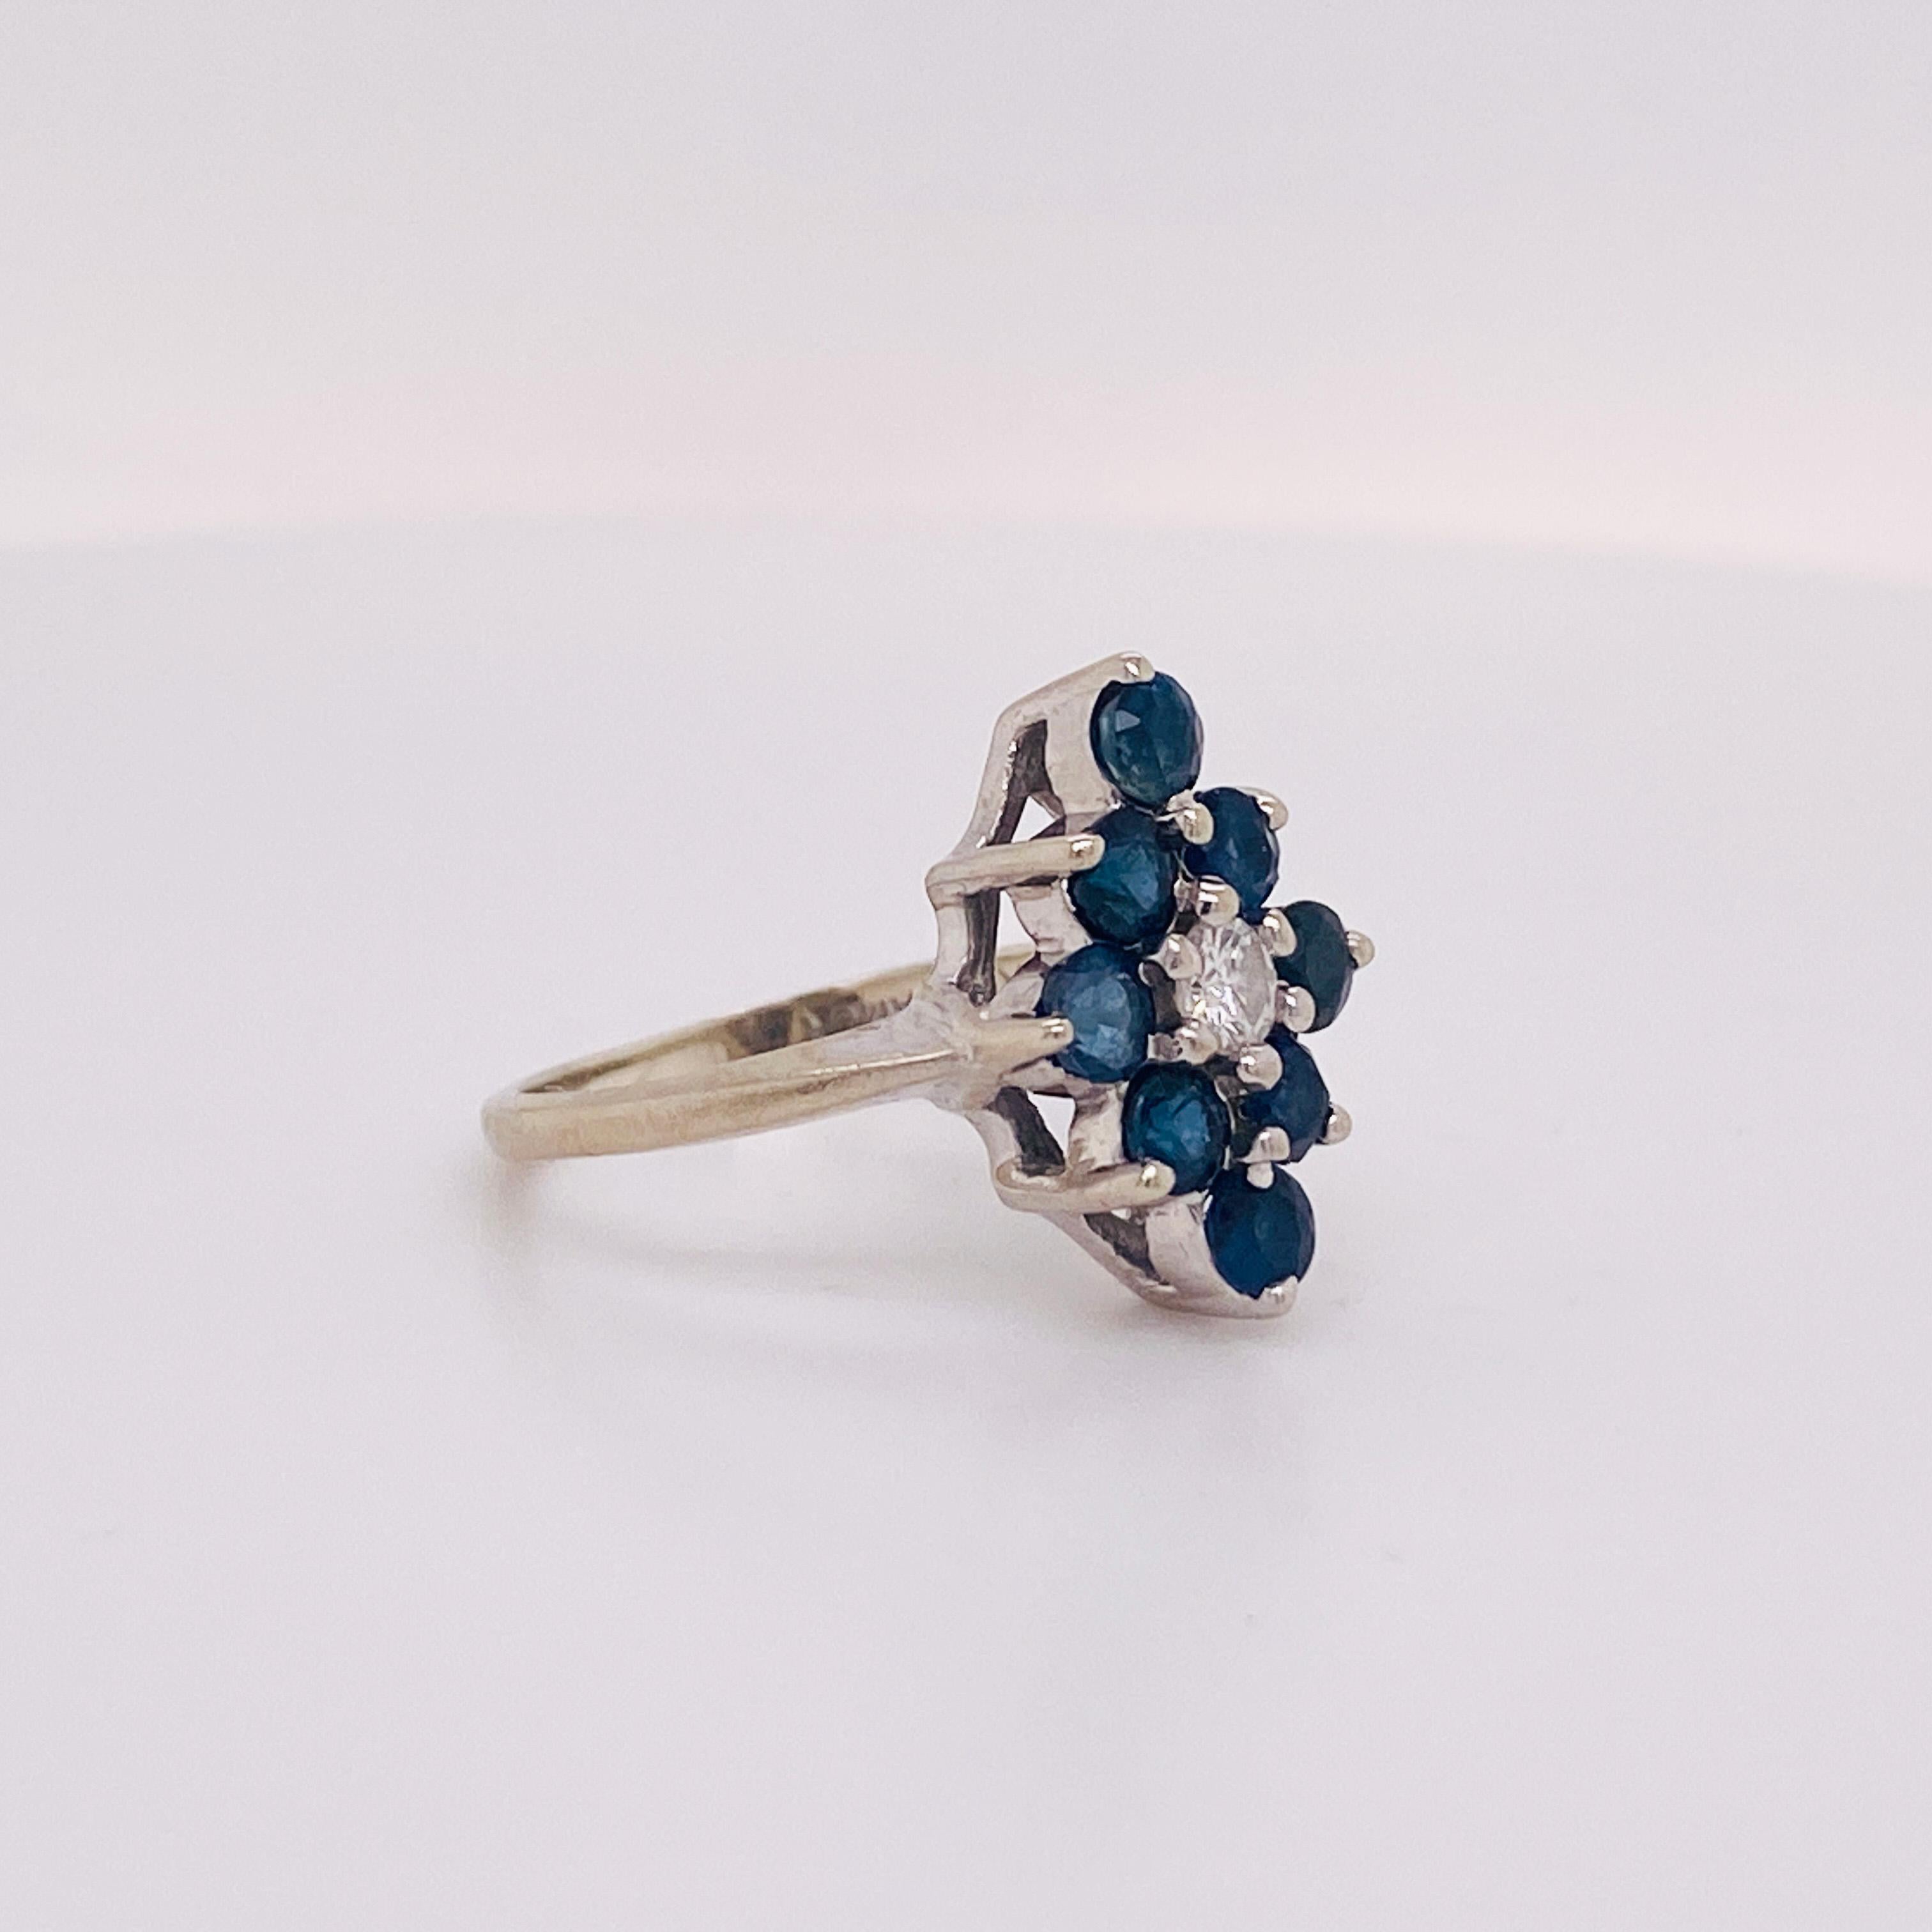 Made in bright 14 karat white gold, this beautiful cluster sapphire and diamond ring would make the perfect gift for a loved one or for yourself. Are you a blue queen of diamonds? The diamond shape around a center diamond is perfect for the card